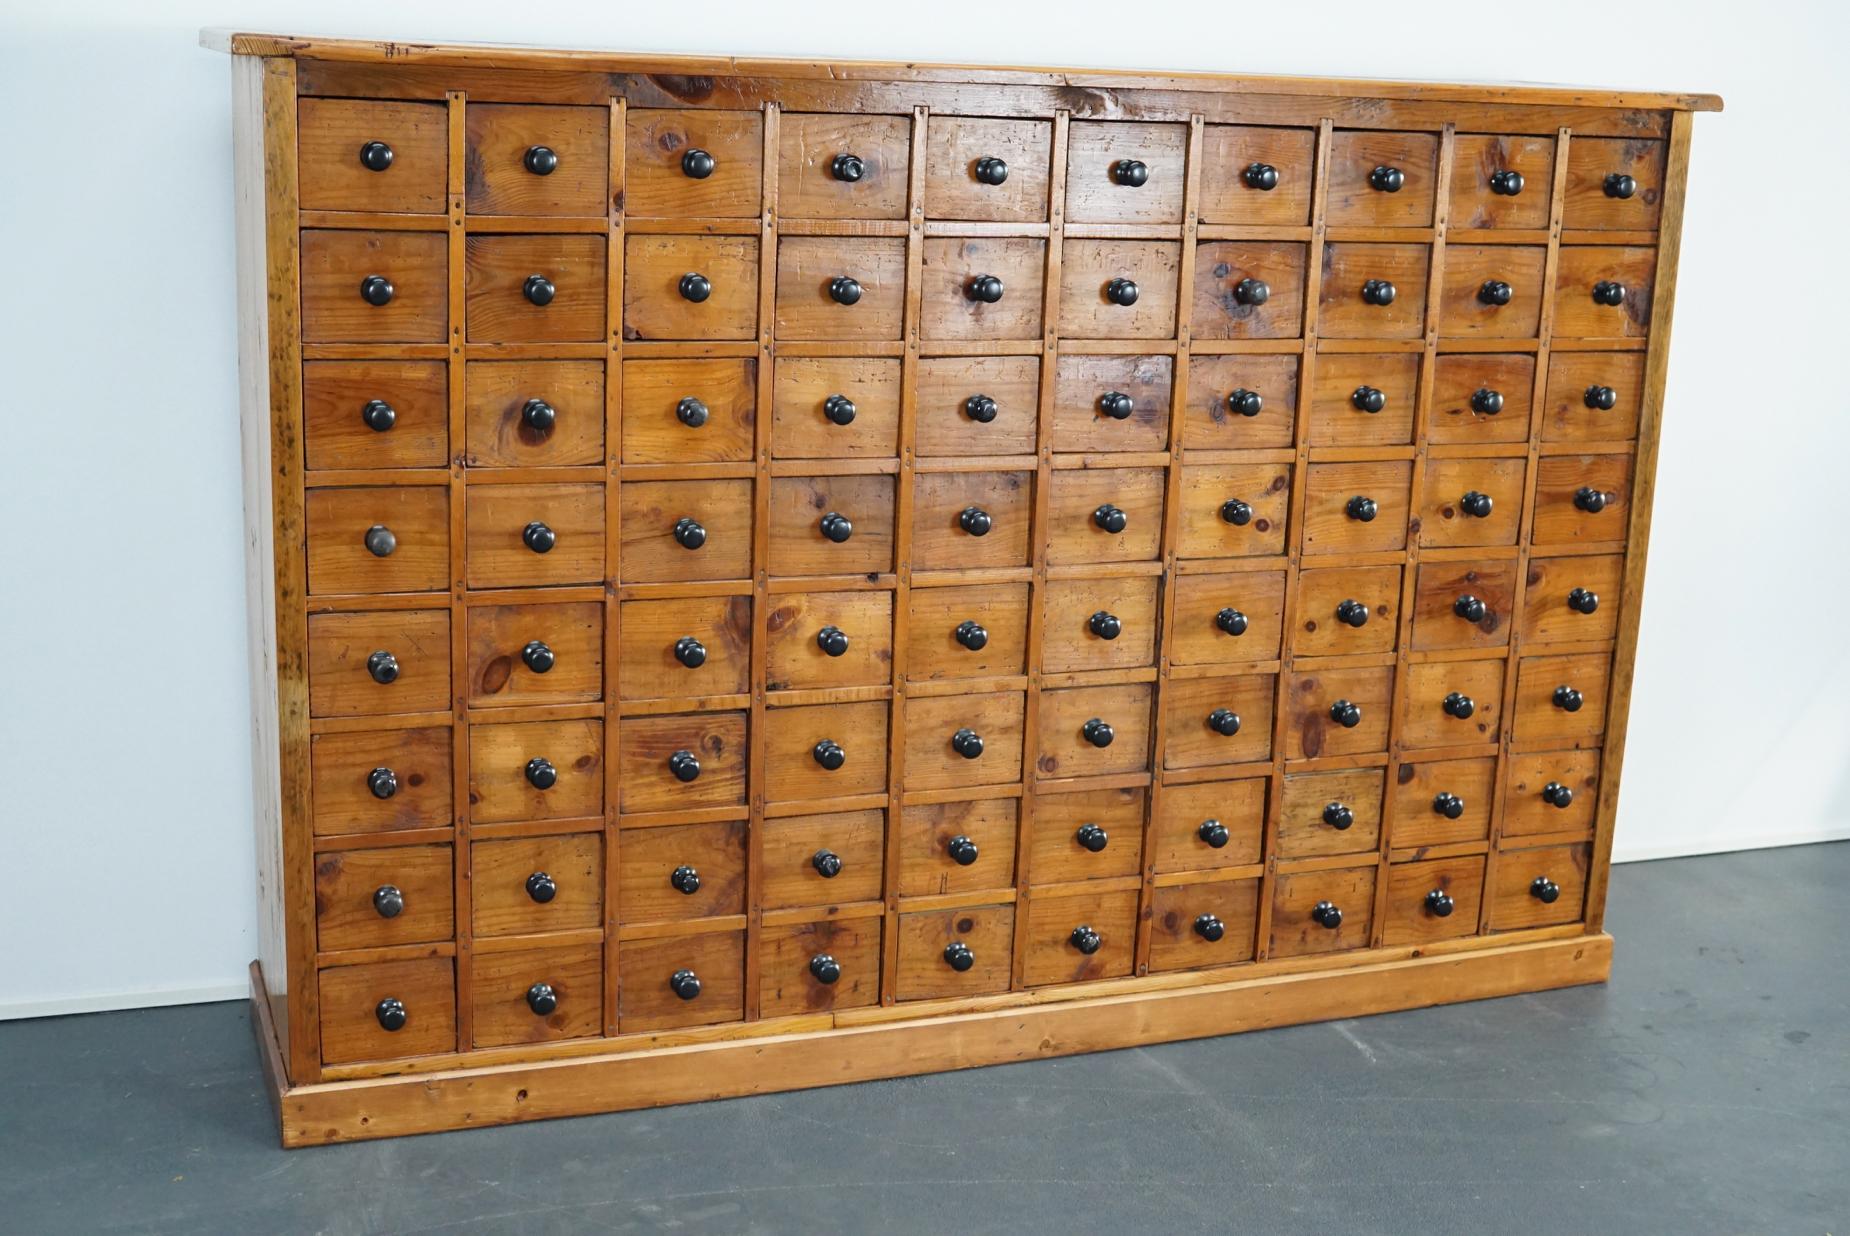 This apothecary cabinet was designed during the 1940s in The Netherlands. The piece features 80 drawers with iron hardware. It remains in a very good restored condition with signs of use and age.

The inside measurements of the drawers are: L 32 x